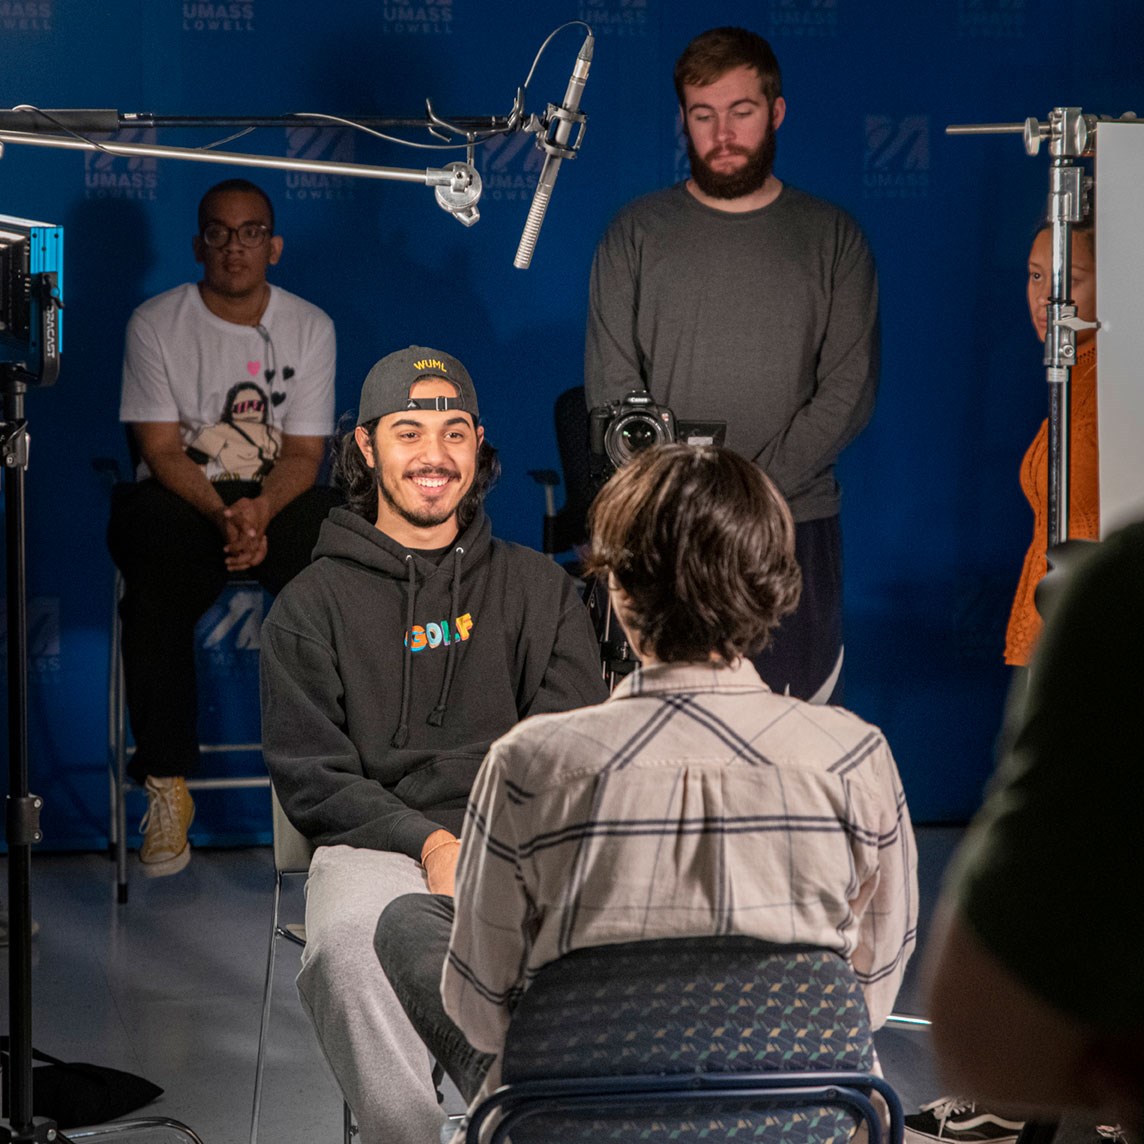 A digital media student is interviewed in a UMass Lowell studio as other students practice videography